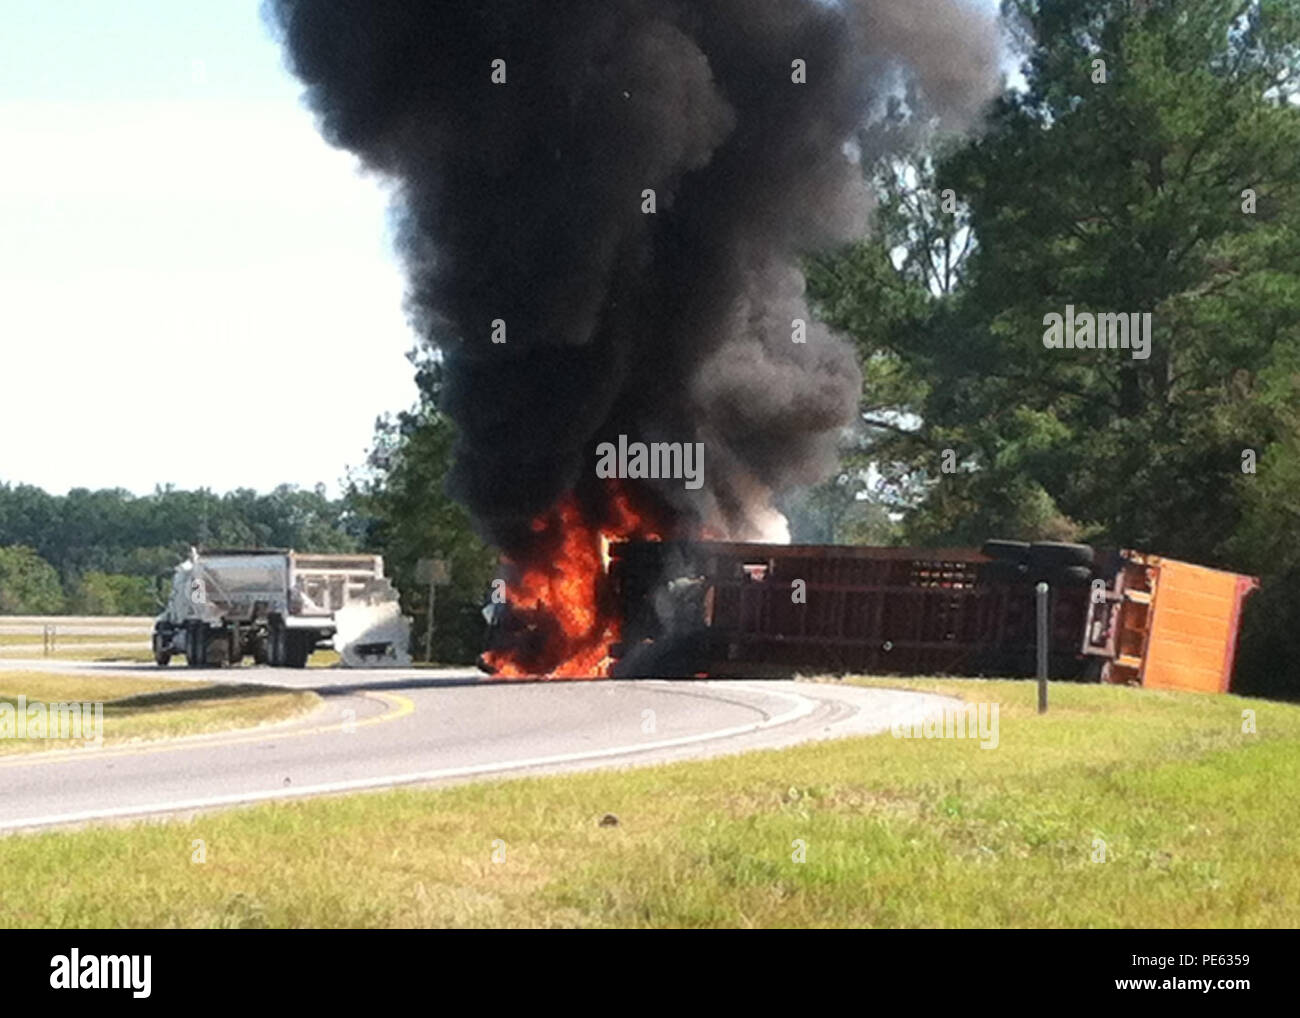 A semi-truck is engulfed in flames after an accident between the semi and a disabled vehicle caused it to flip. Four Coast Guardsmen, with Coast Guard Sector Mobile, witnessed the accident, called 911 and quickly responded by pulling the unconscious truck driver from the semi-truck cab before it was engulfed in flames, and rendered first aid until local emergency medical services arrived on-scene. (U.S. Coast Guard photo courtesy of Coast Guard Sector Mobile) Stock Photo